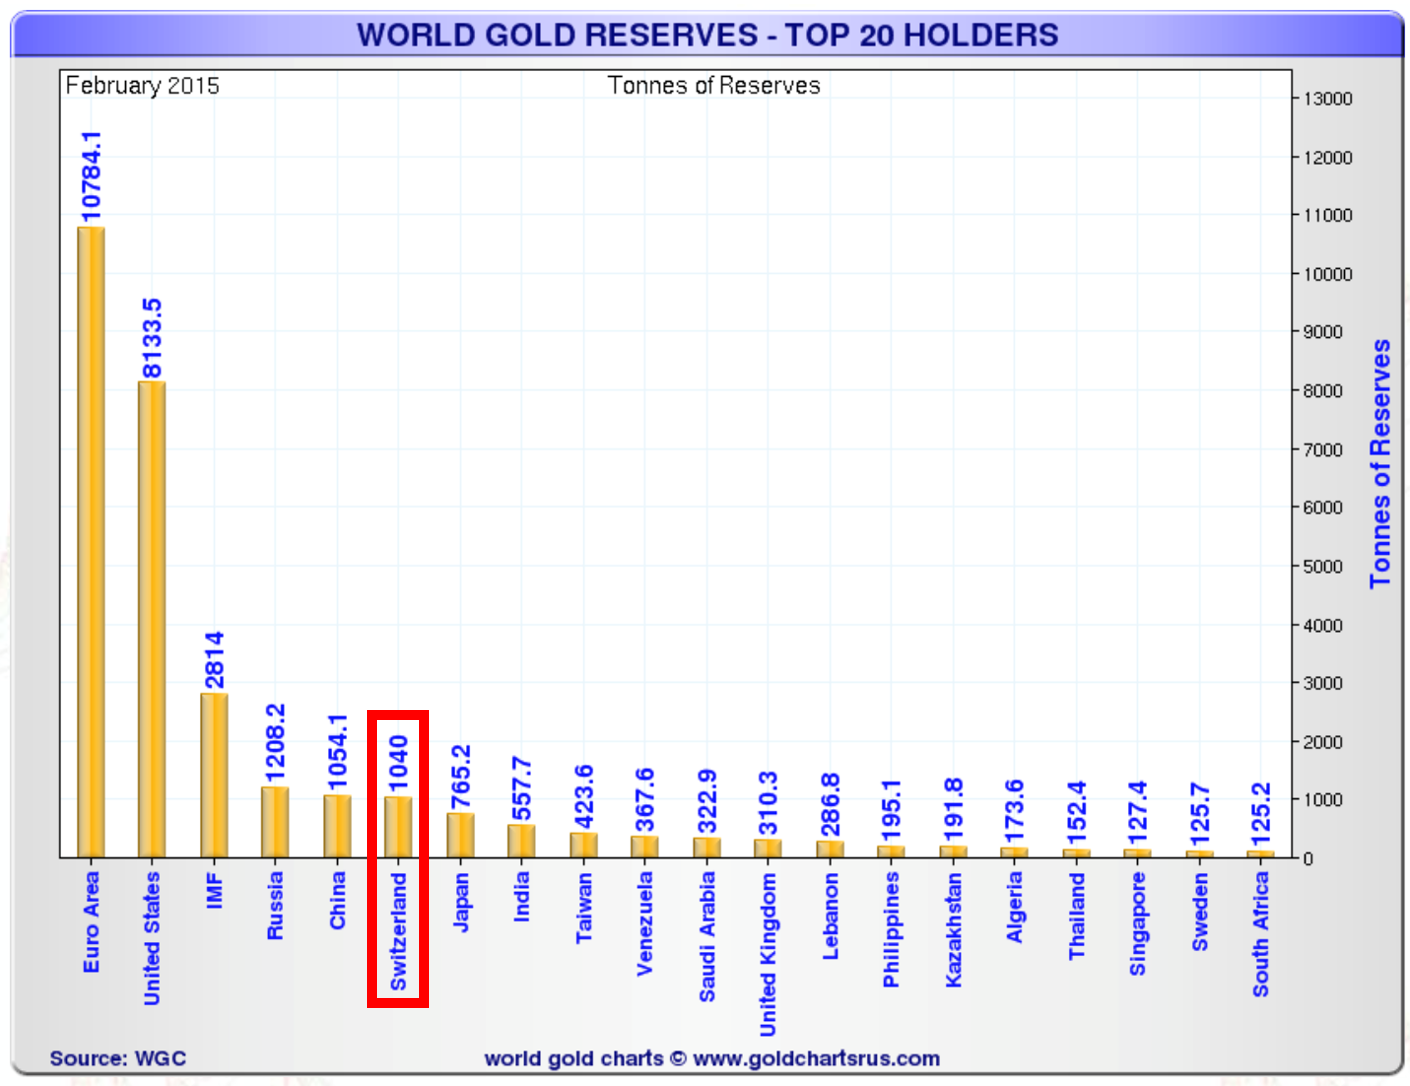 World Gold Reserves – Top 20 Holders (Tonnes)